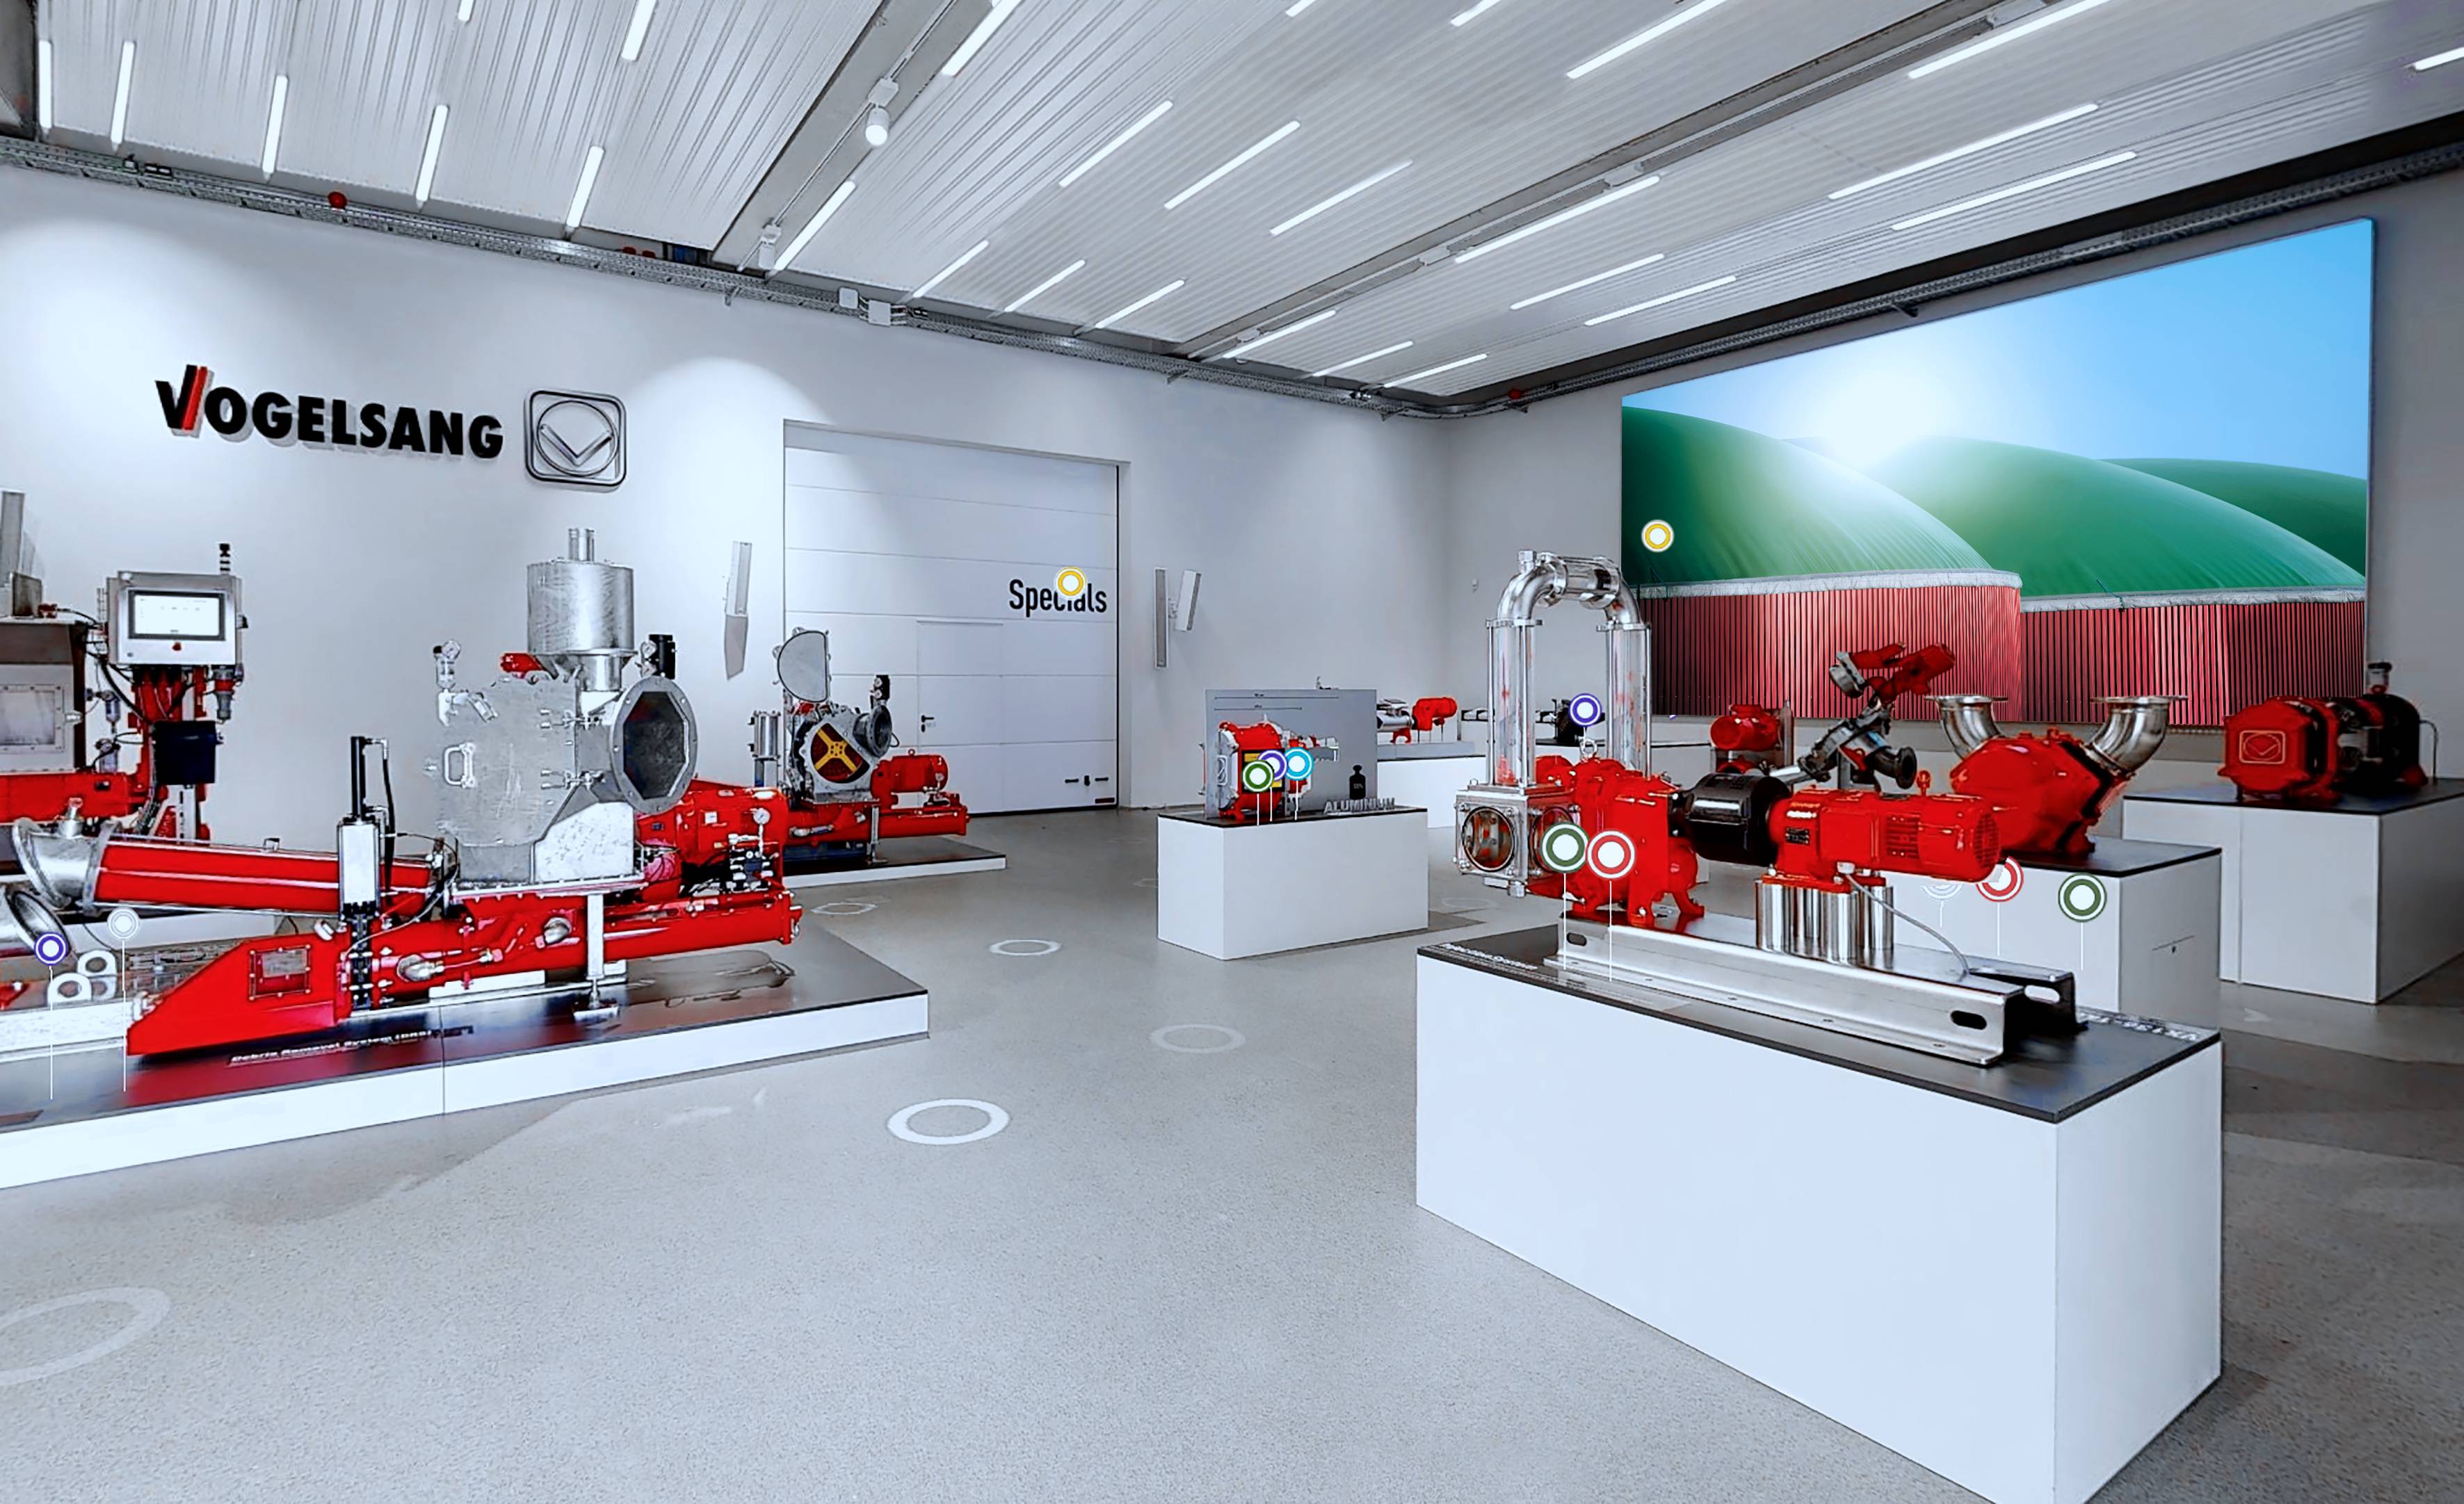 The virtual showroom offers a 360-degree view of its solutions for the biogas industry.